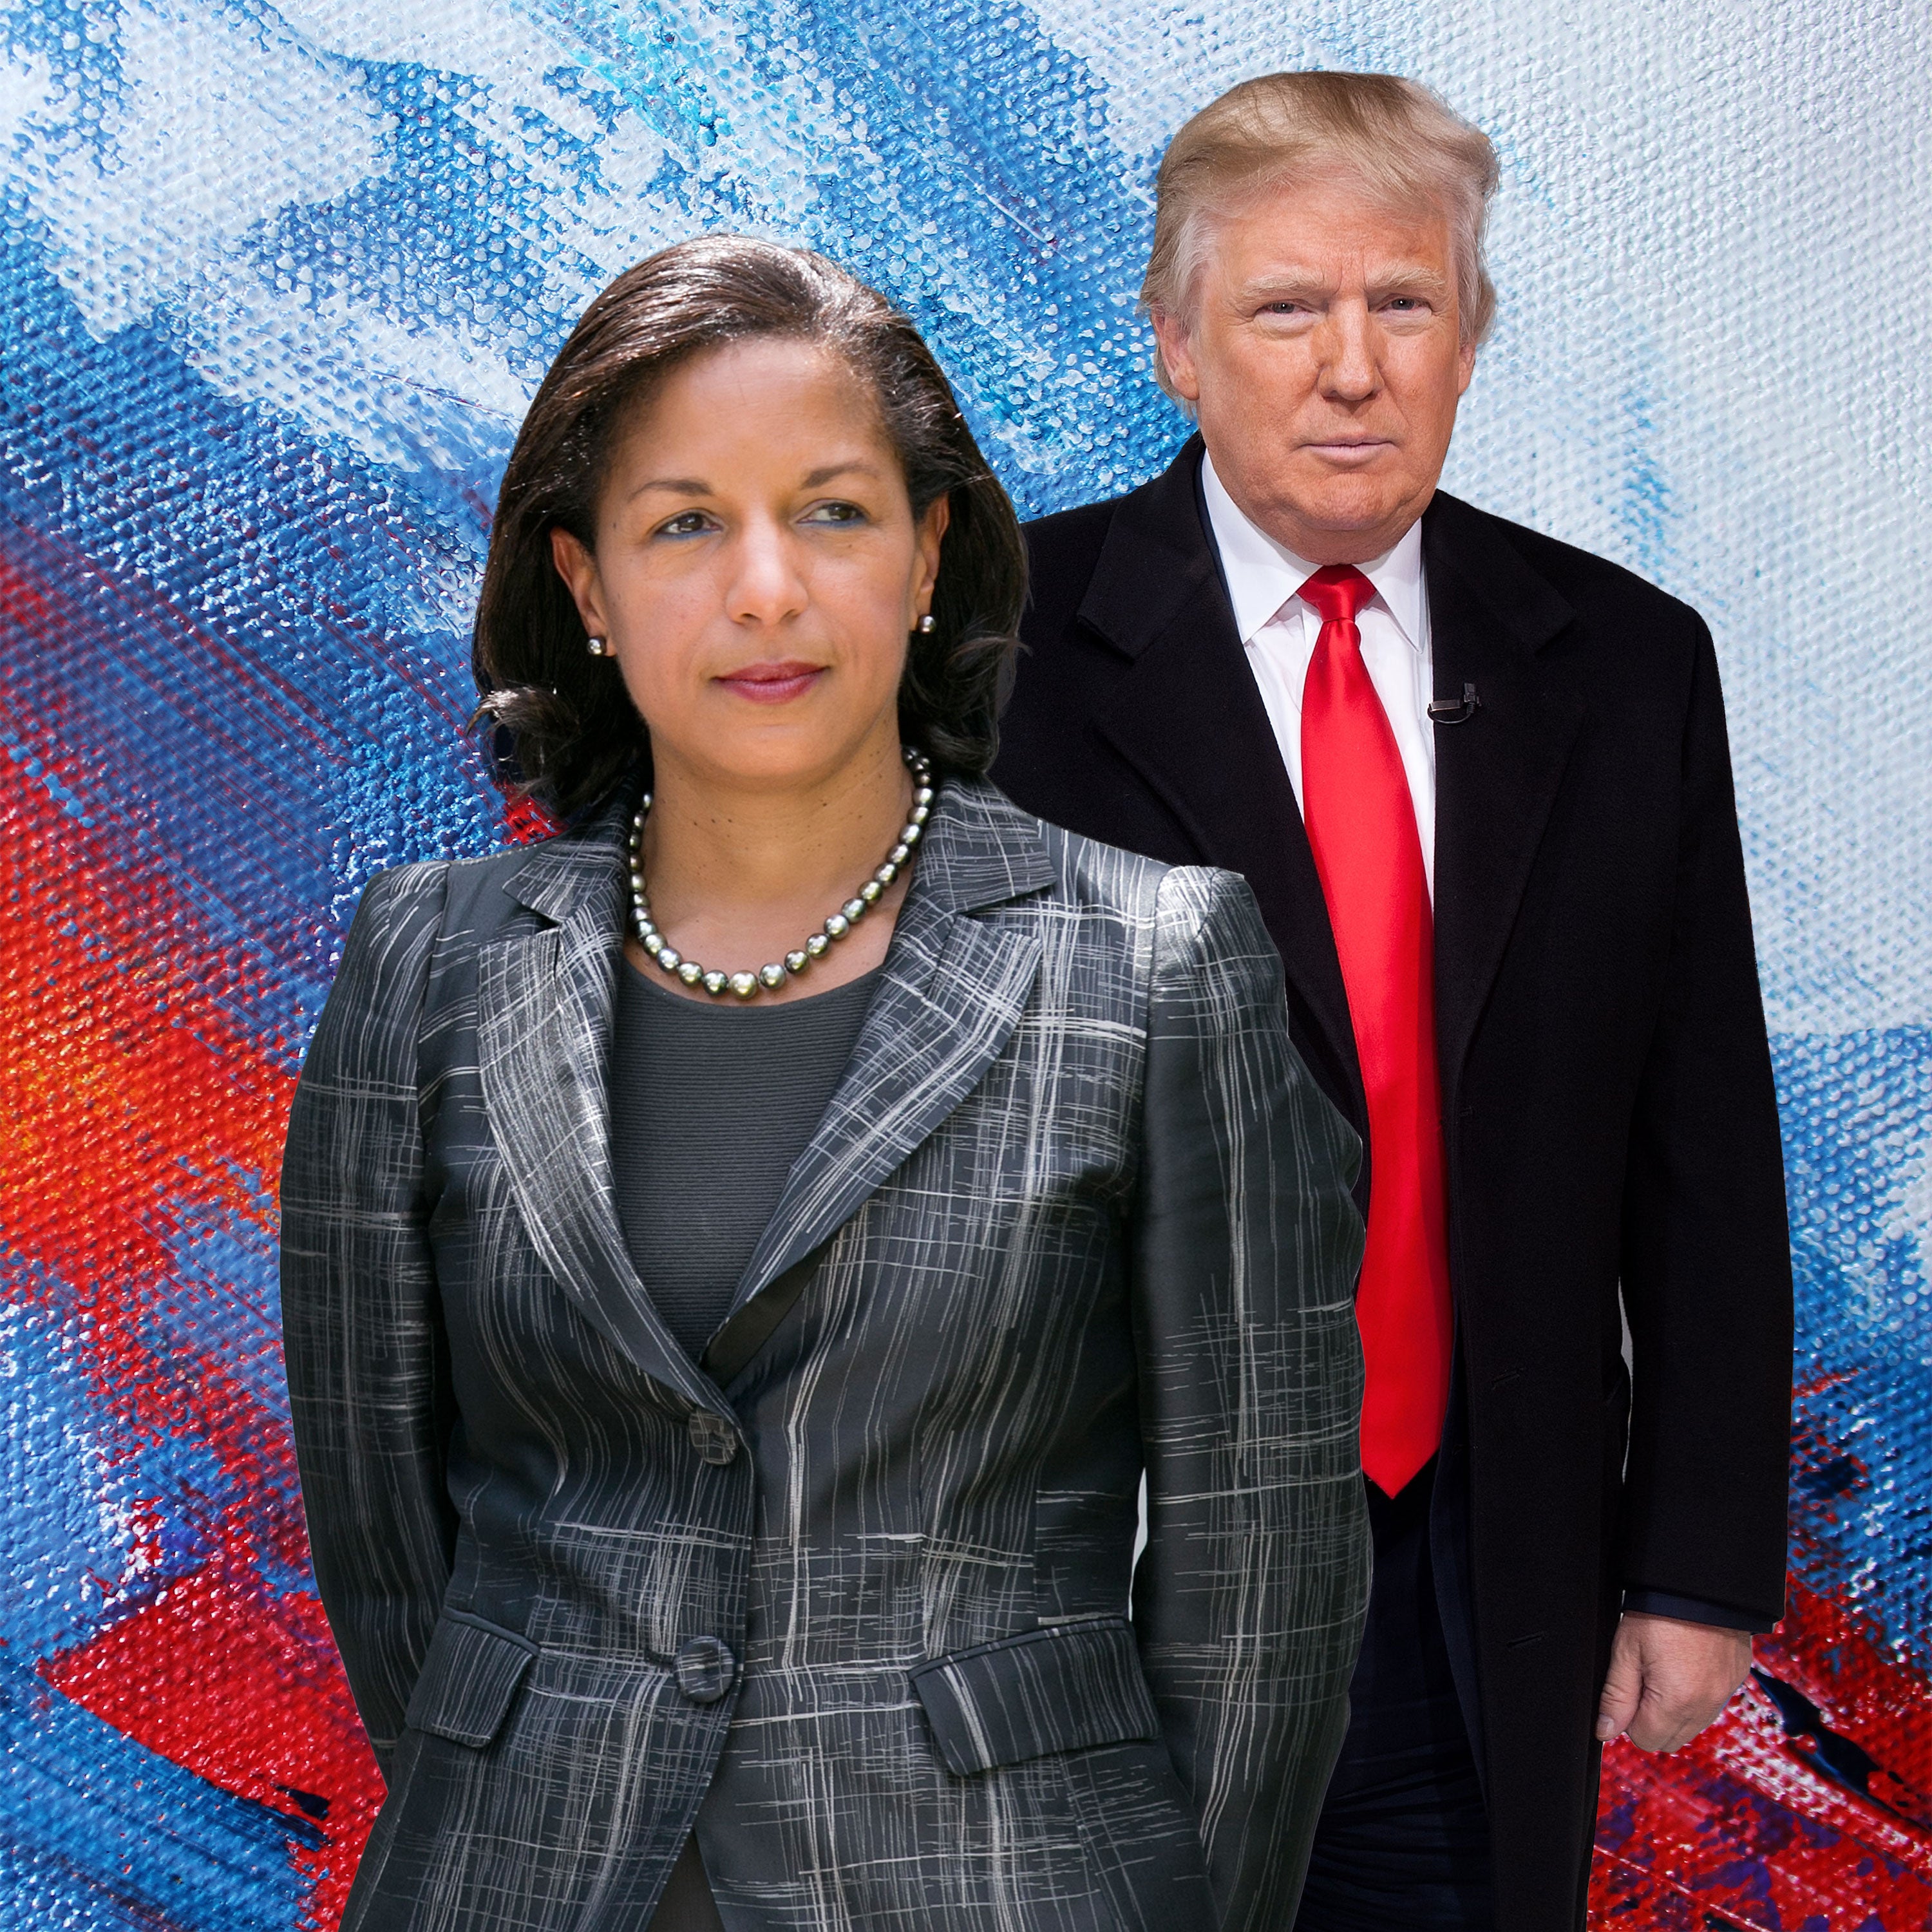 A Quick Explainer On Donald Trump, Susan Rice And The Legality Of "Unmasking"
